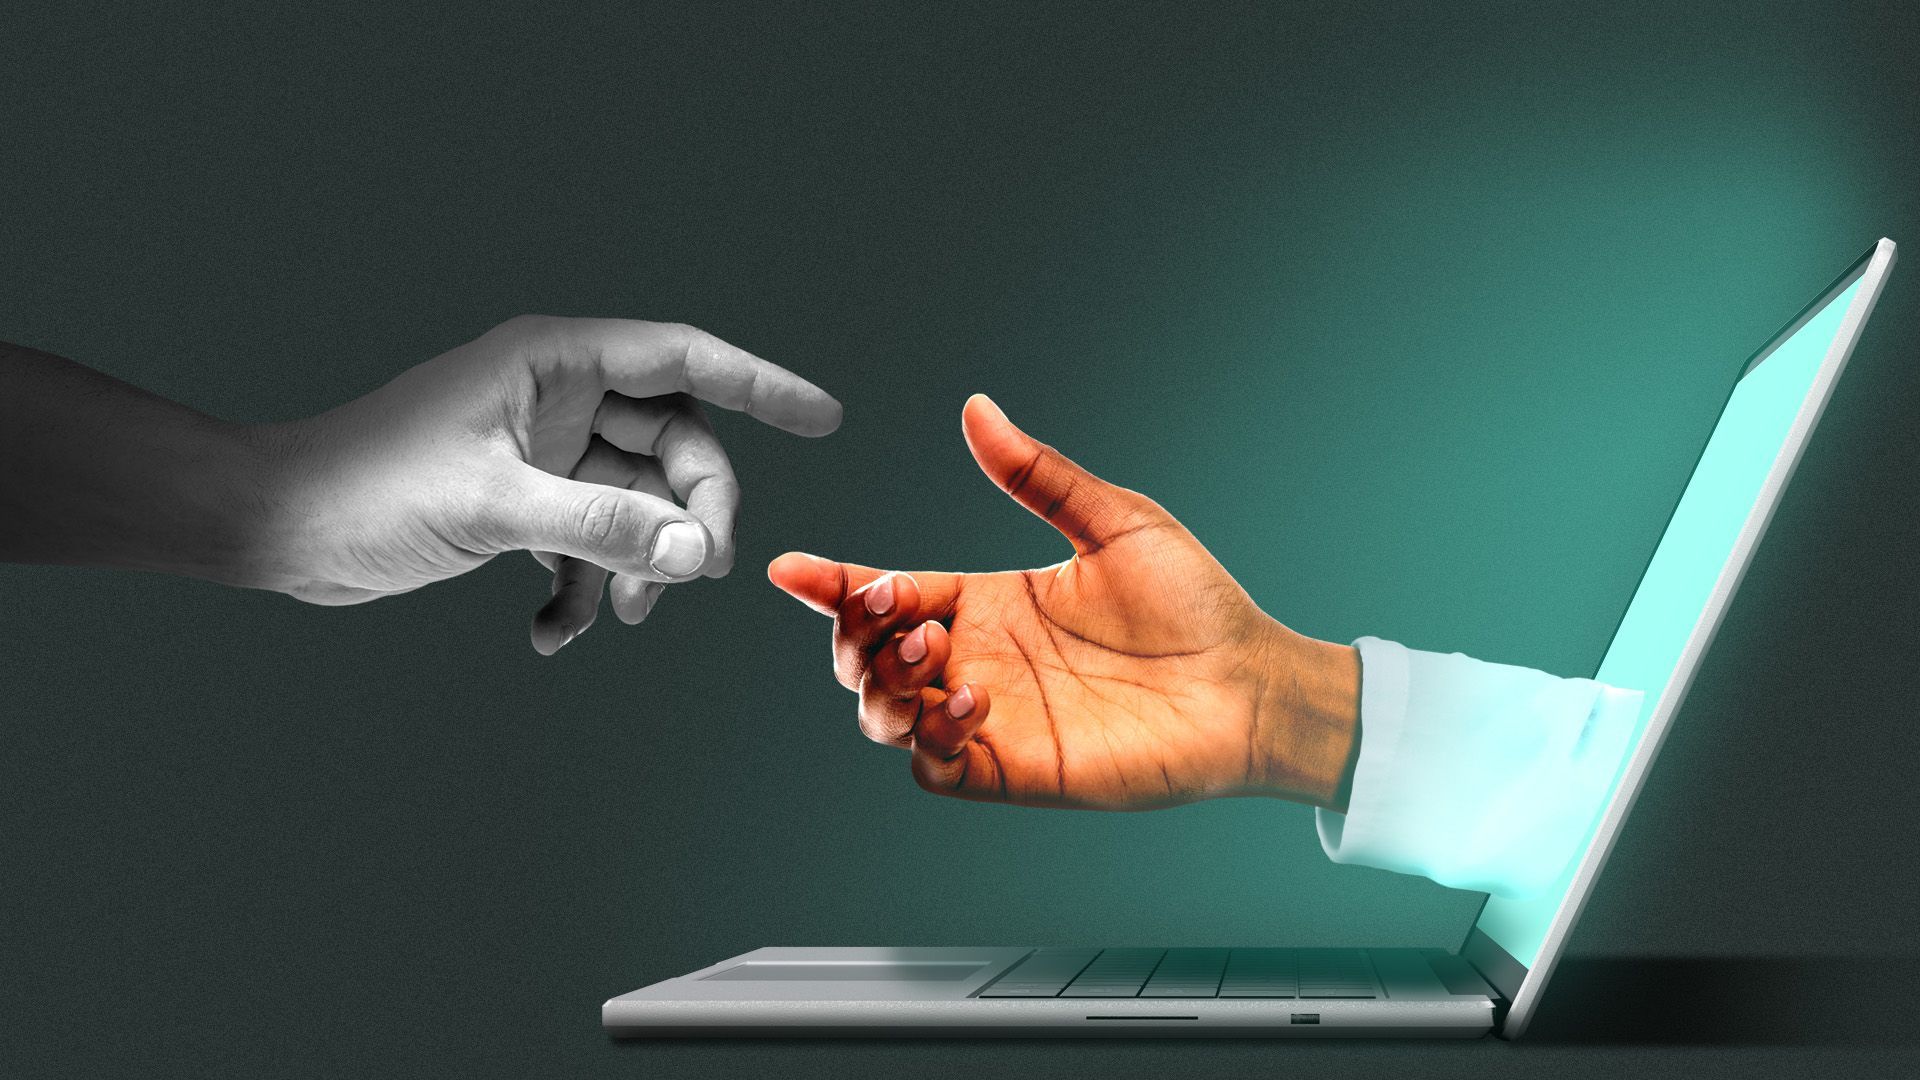 Illustration of a hand reaching out darkness towards a hand in a white lab coat reaching out of a computer